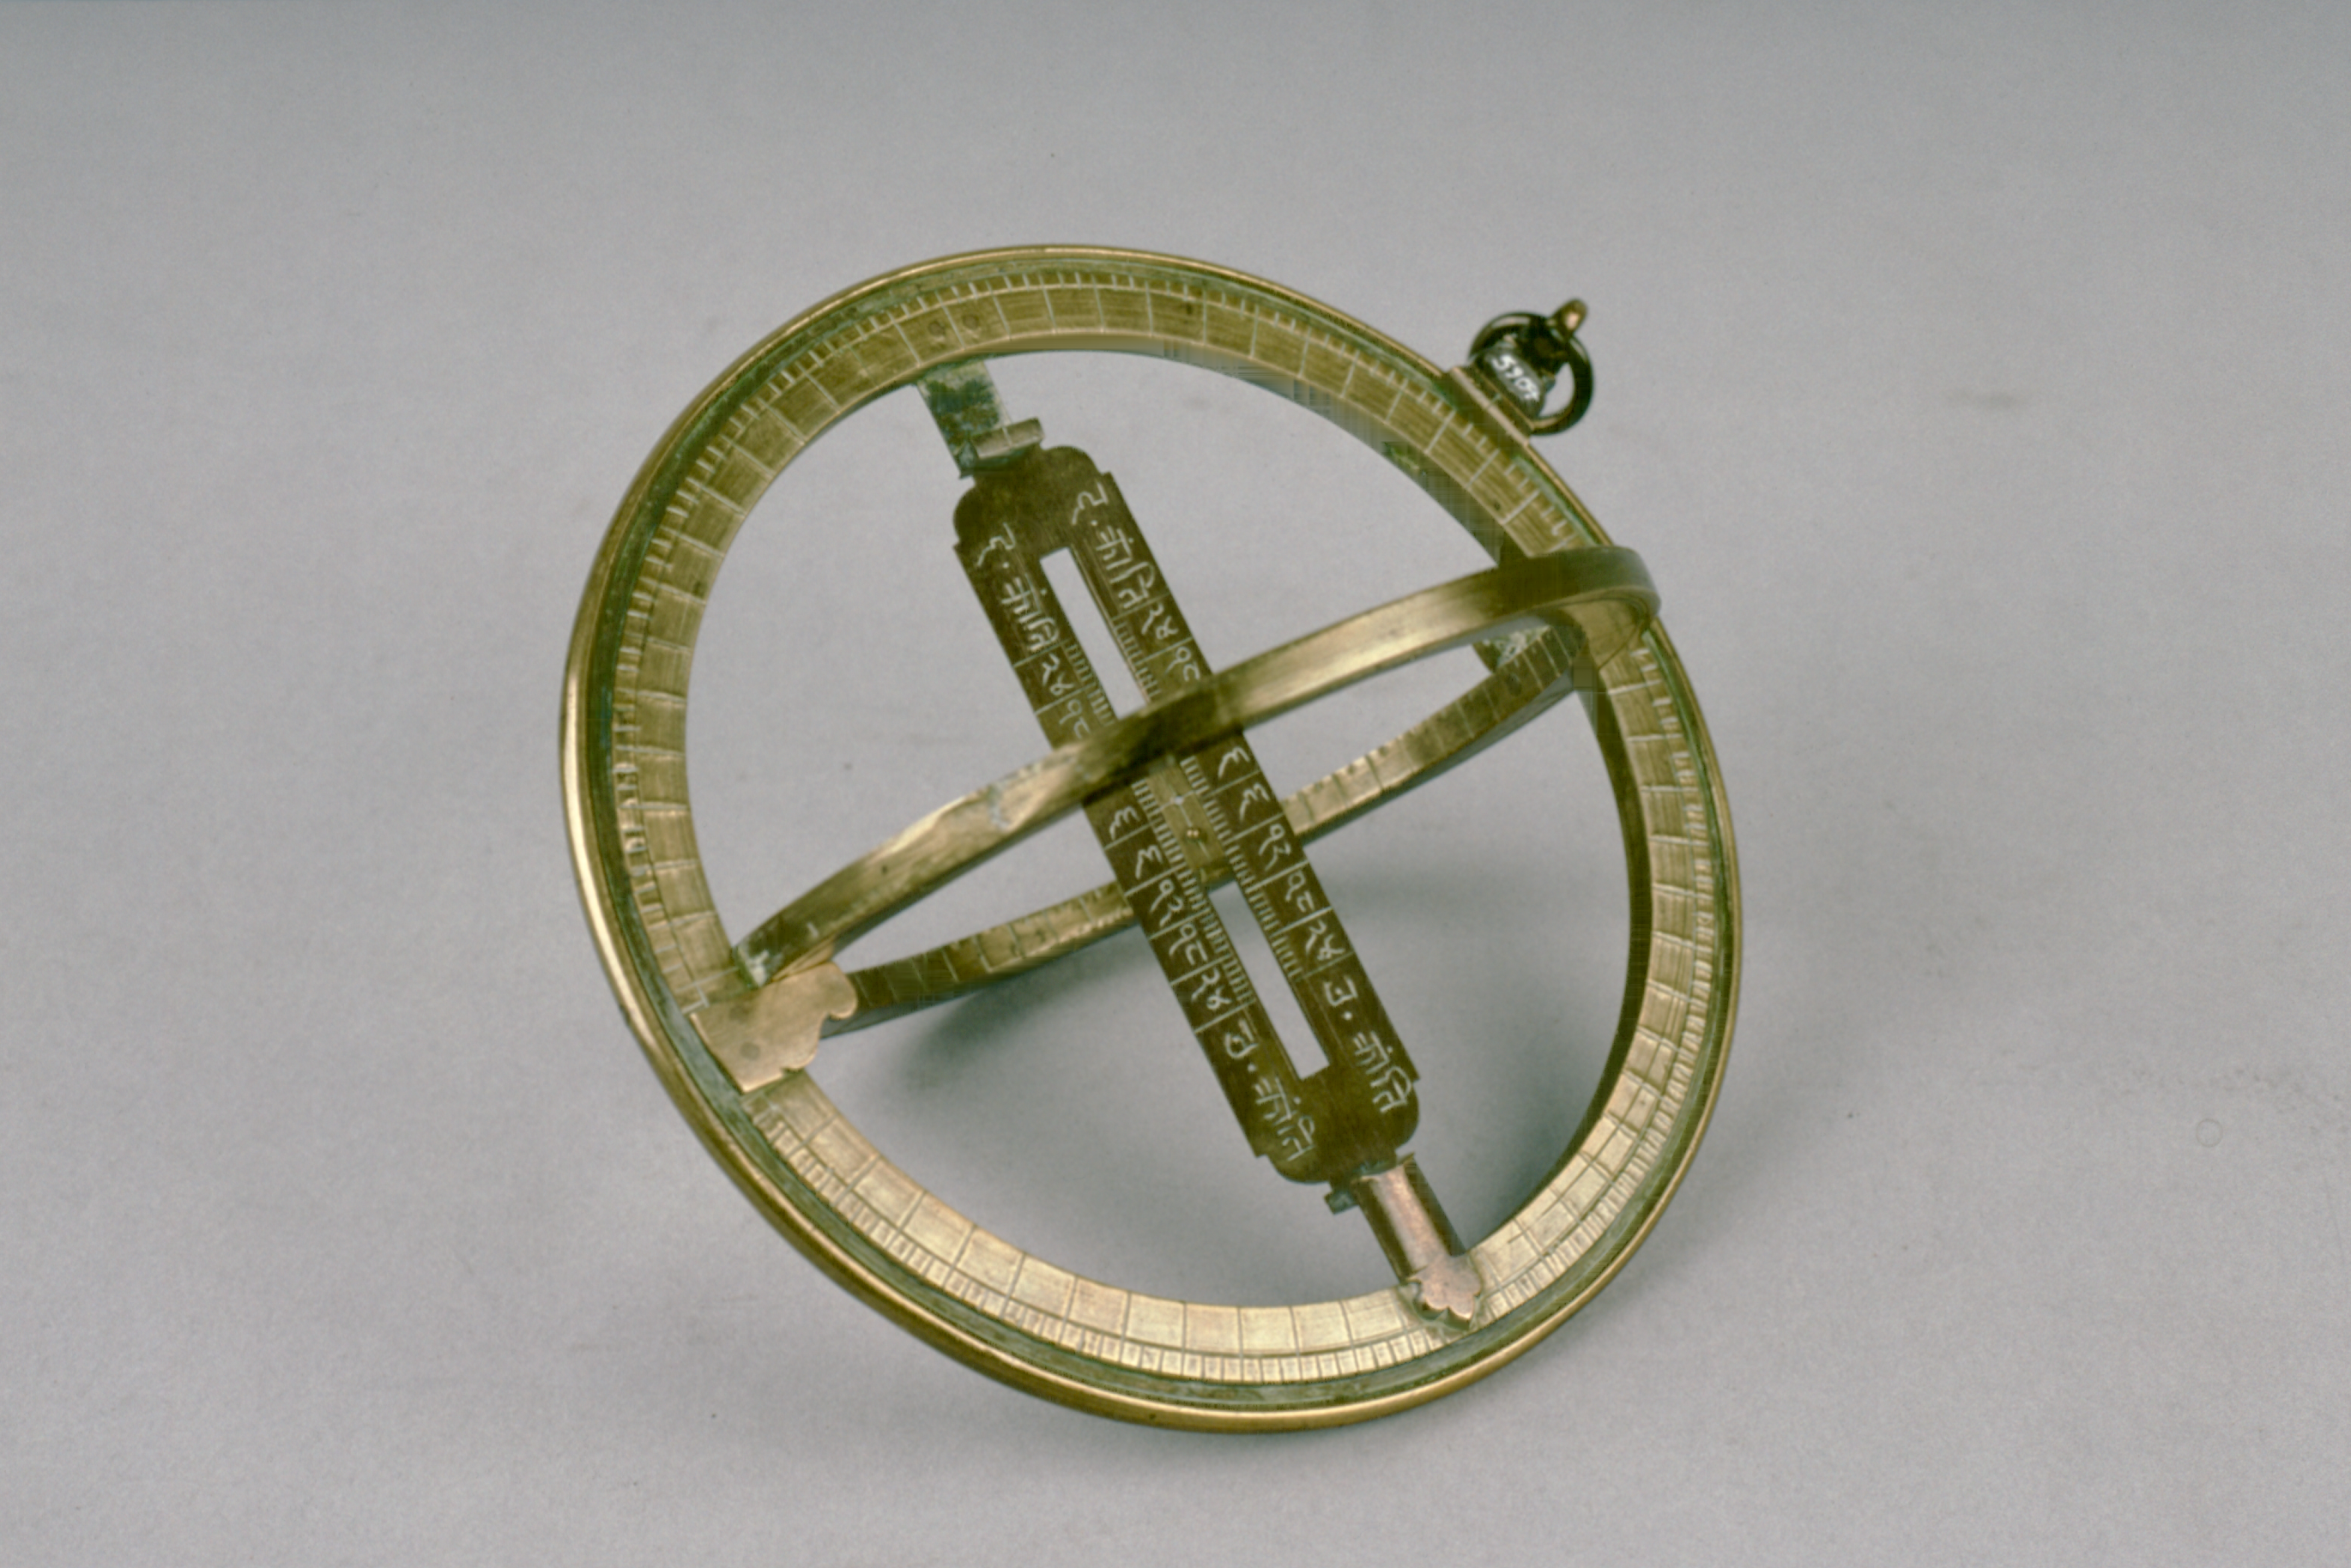 1. Sanskrit-engraved universal equinoctial sundial. Wh.5907. Whipple Museum of the History of Science